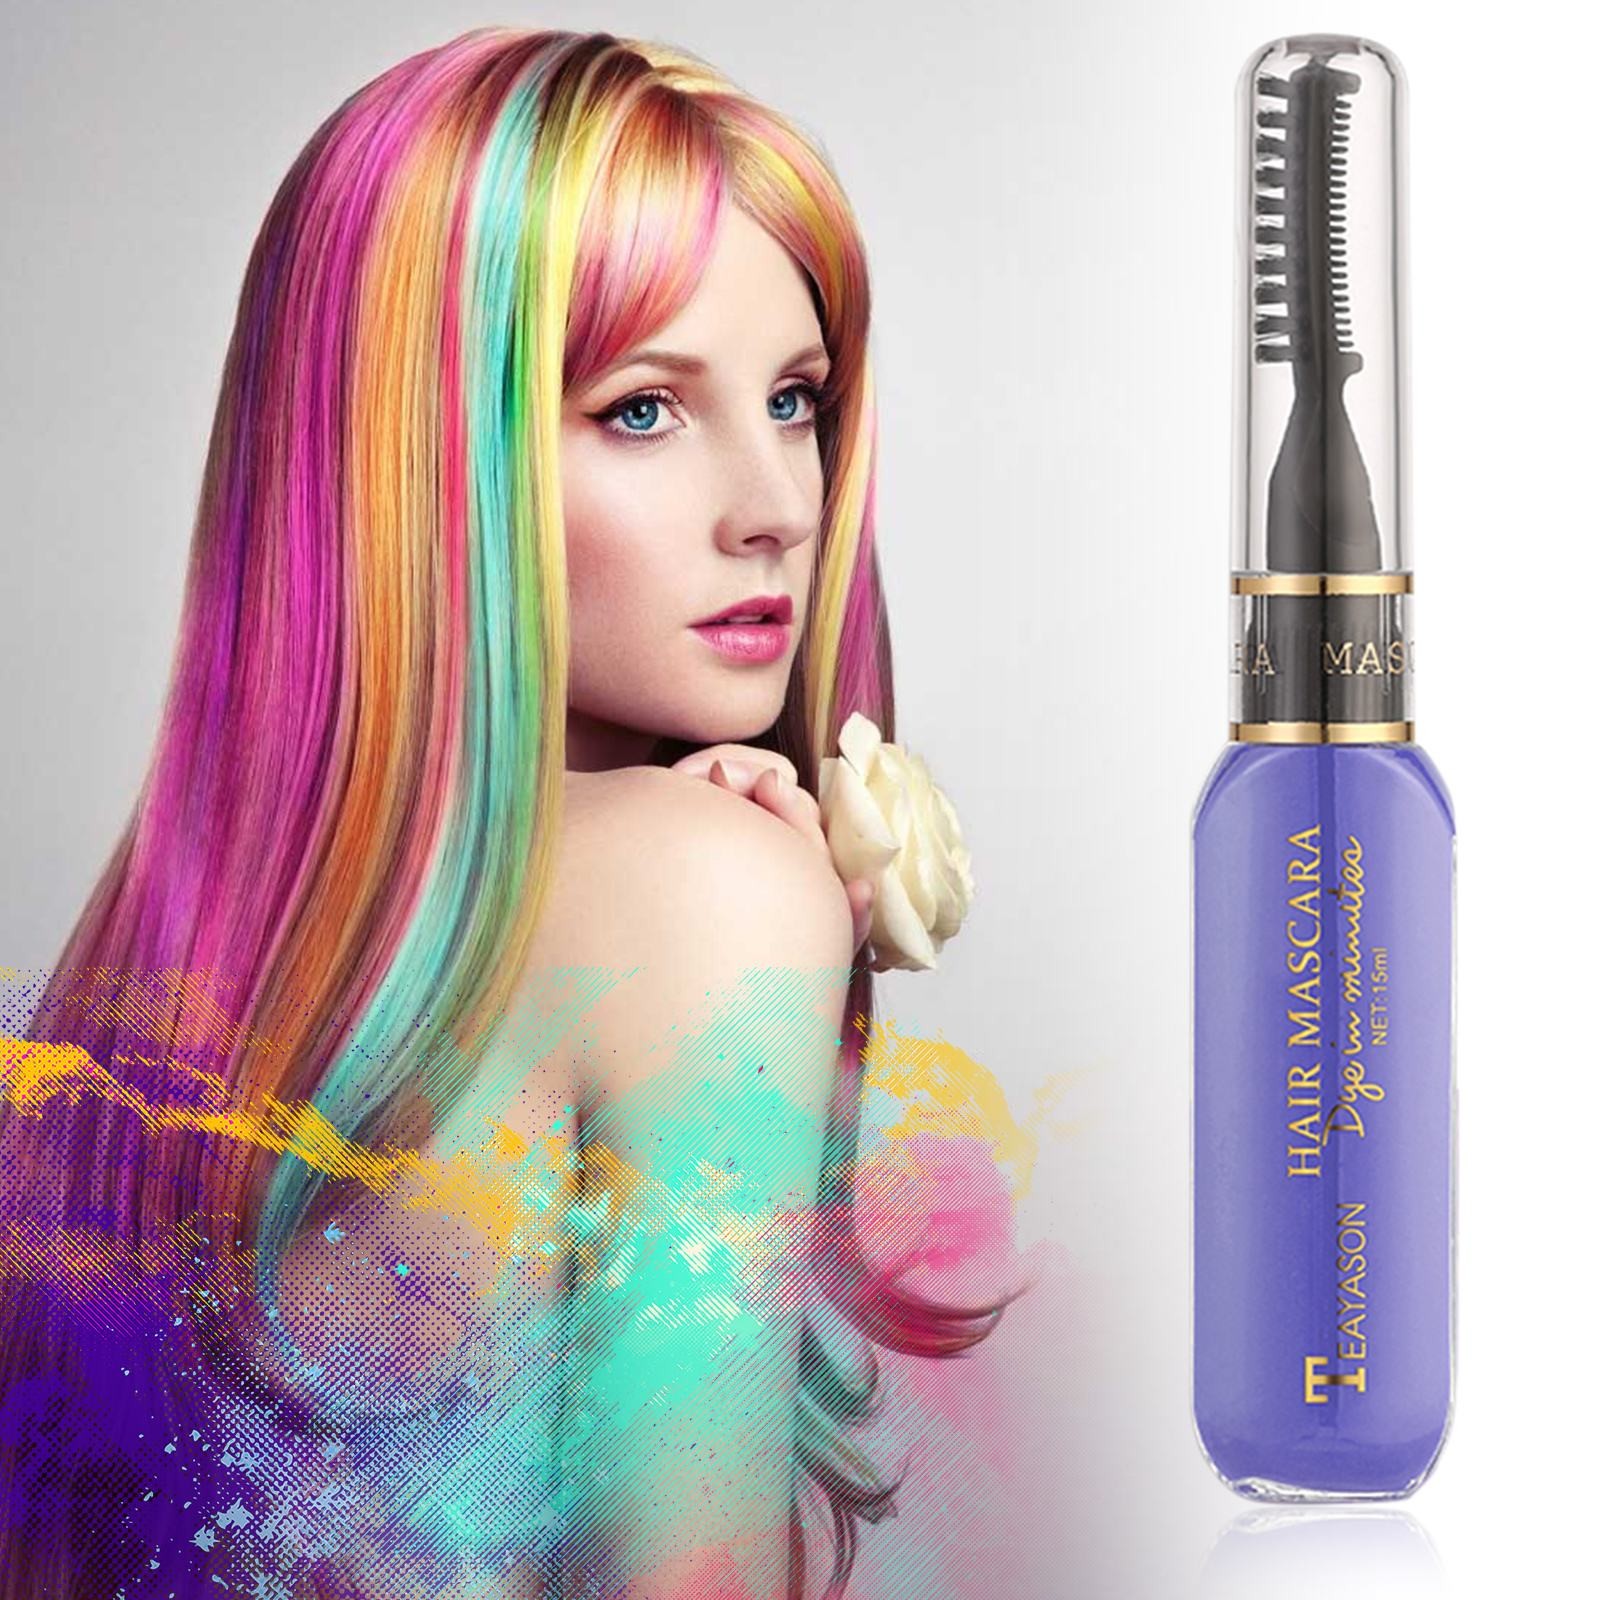 HSMQHJWE 4c Hair Care Kit Disposable Hair Color Temporary Hair Color Chalk Comb Set Women Instant Hair Color Highlight Stripe Color Mascara Hair Chalk For Birthday Party 3ml And Travel Kit - image 5 of 5